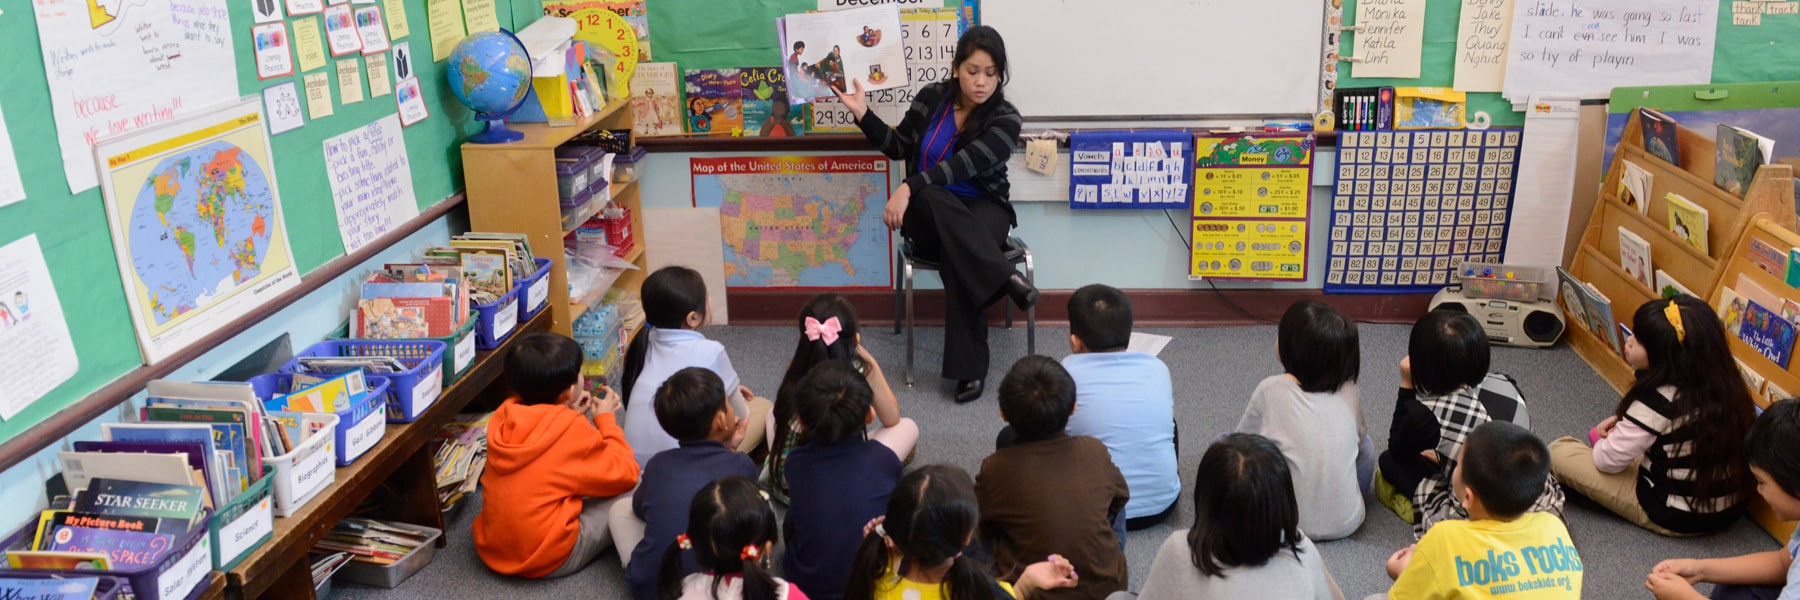 young teacher holding up a book and seated in front of large classroom of small children